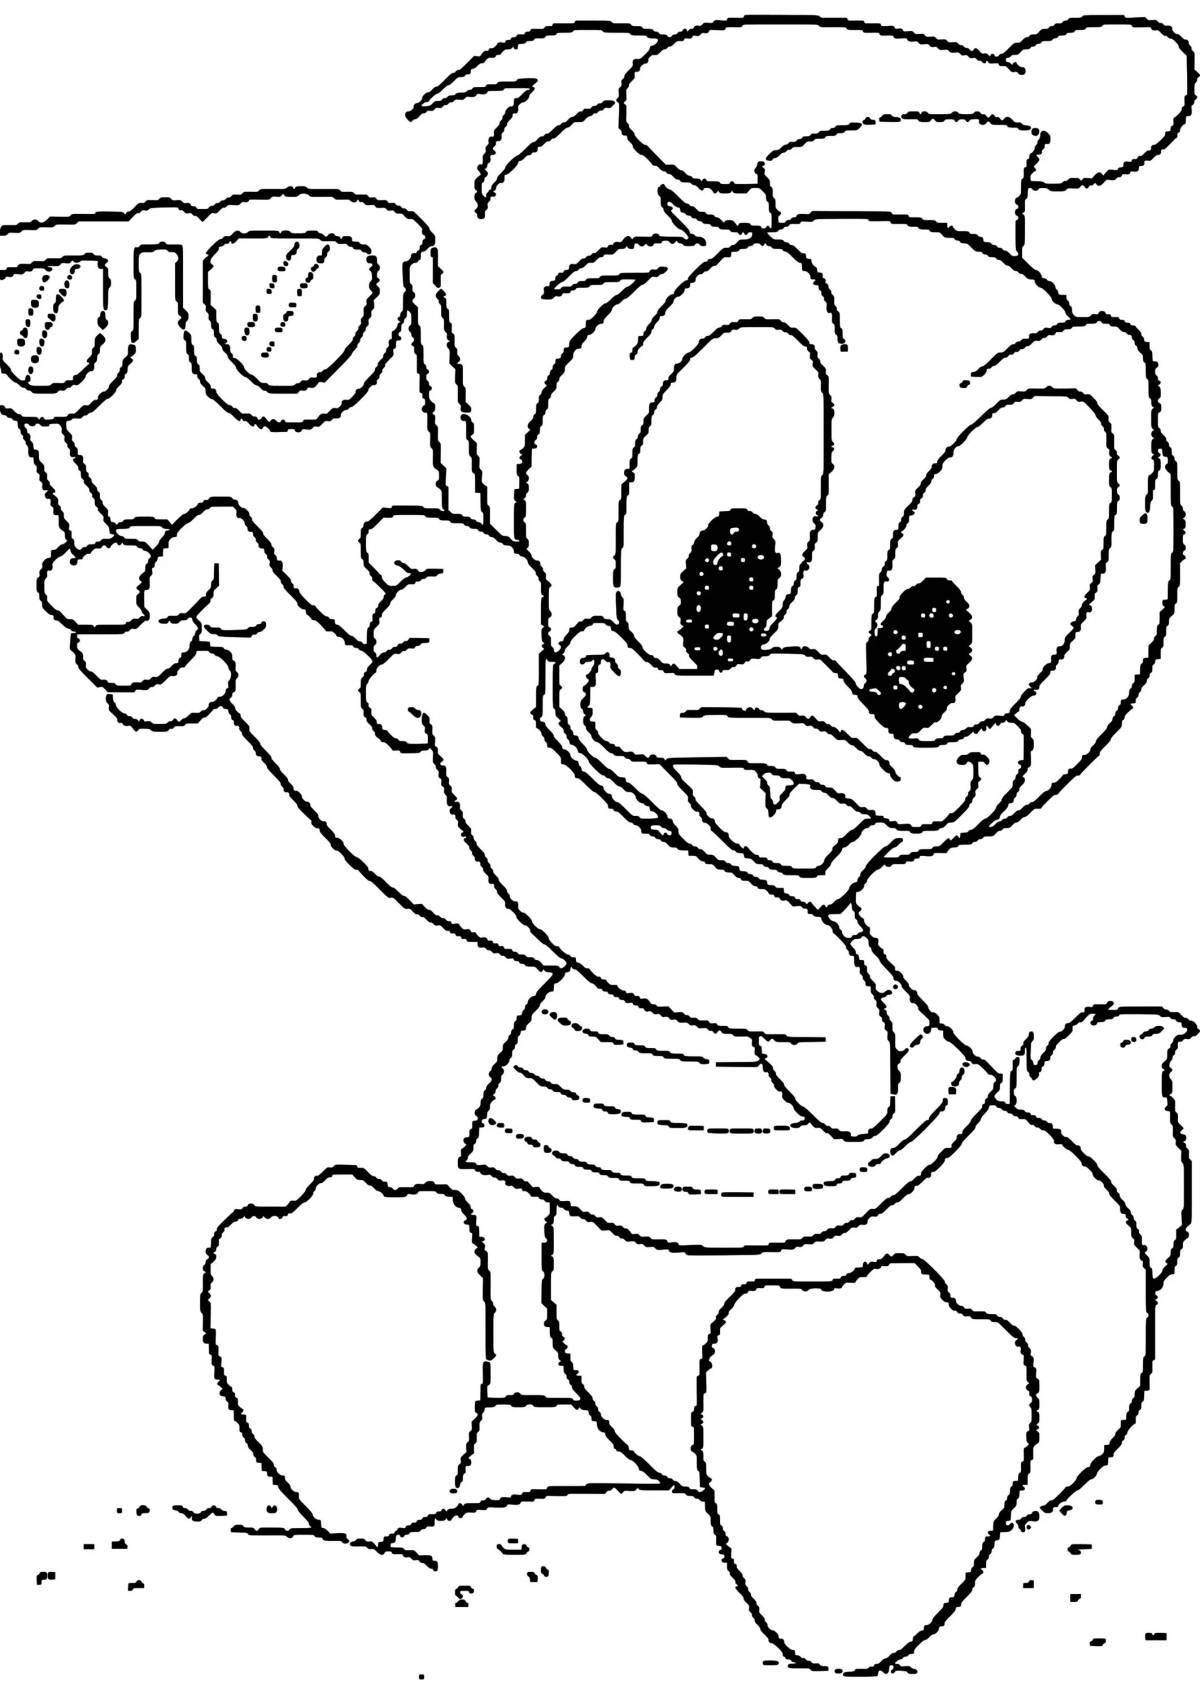 A fascinating cartoon character coloring page